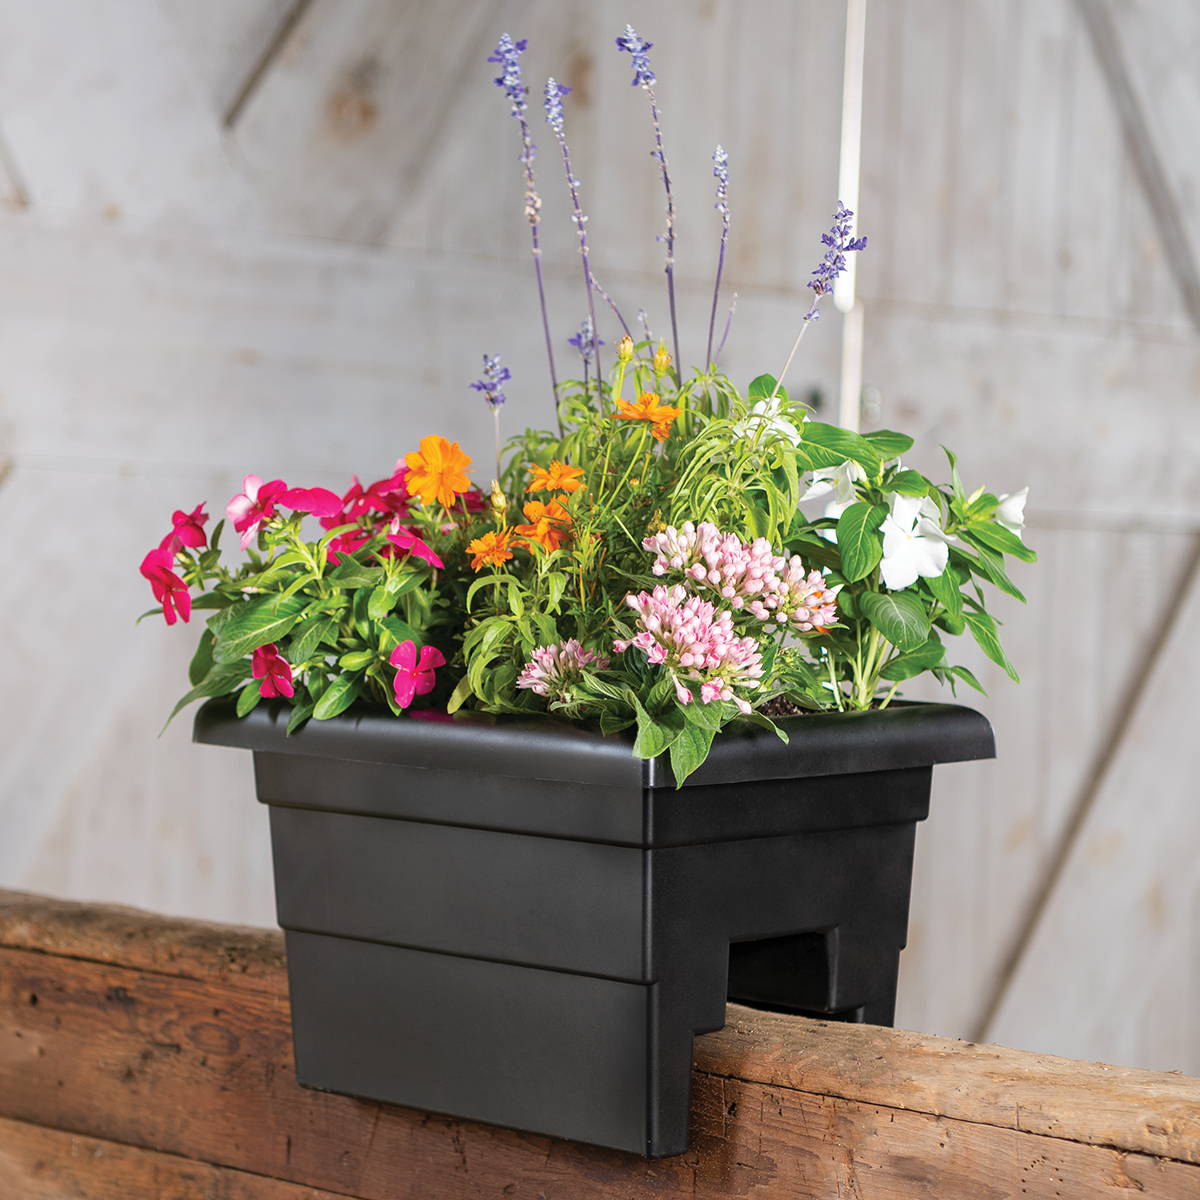 Black deck railing planter with orange, red, and pink flowers